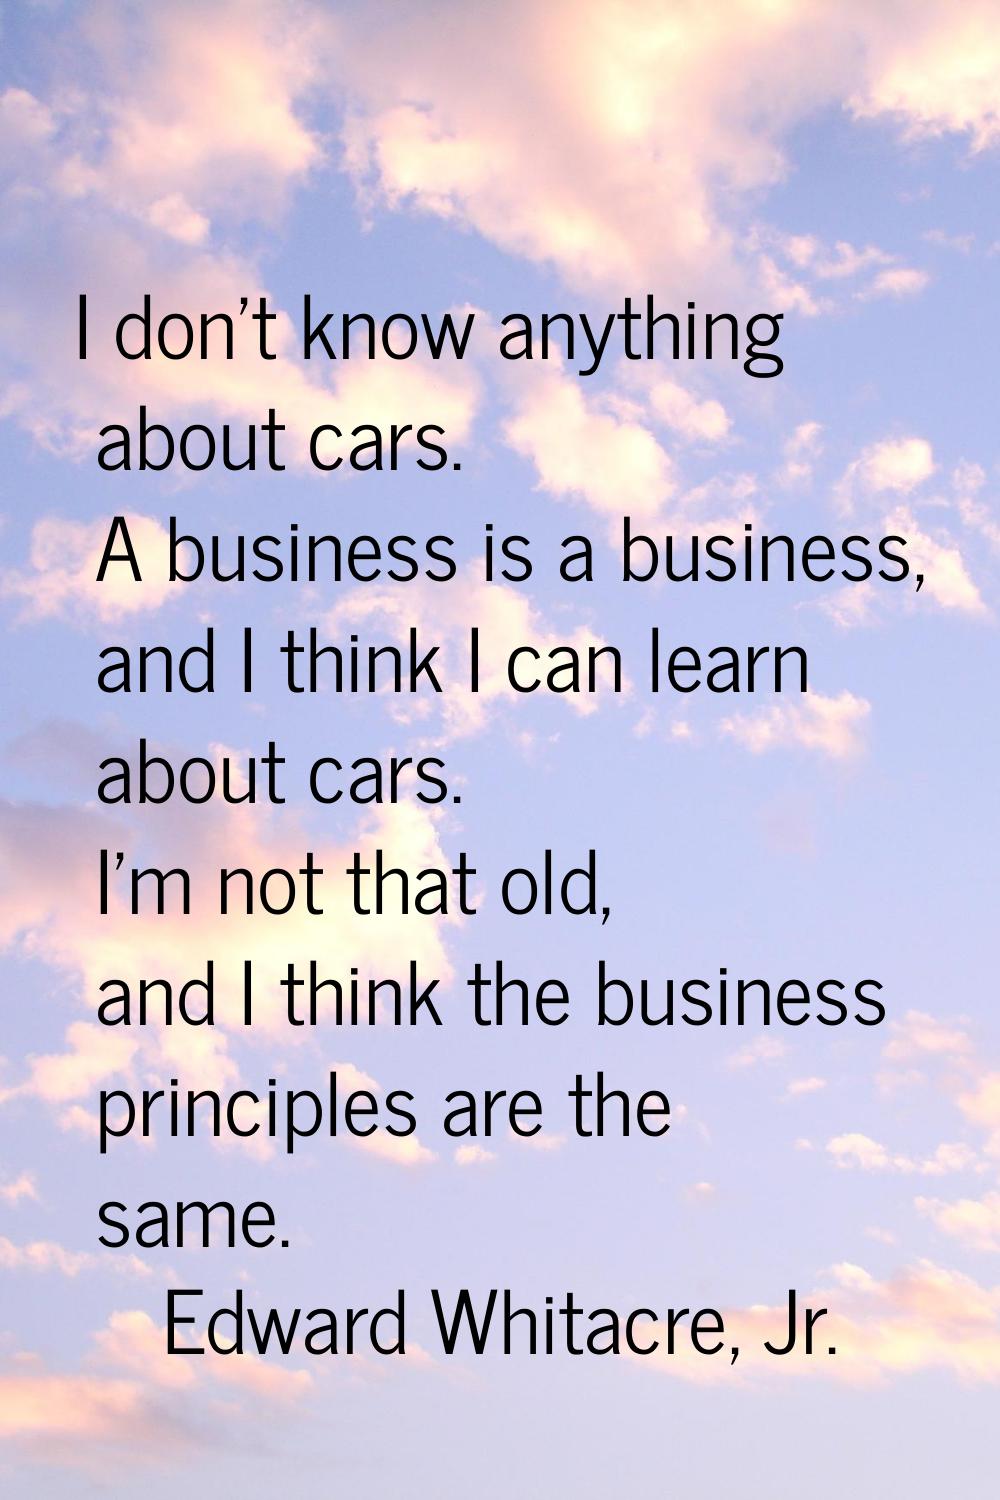 I don't know anything about cars. A business is a business, and I think I can learn about cars. I'm